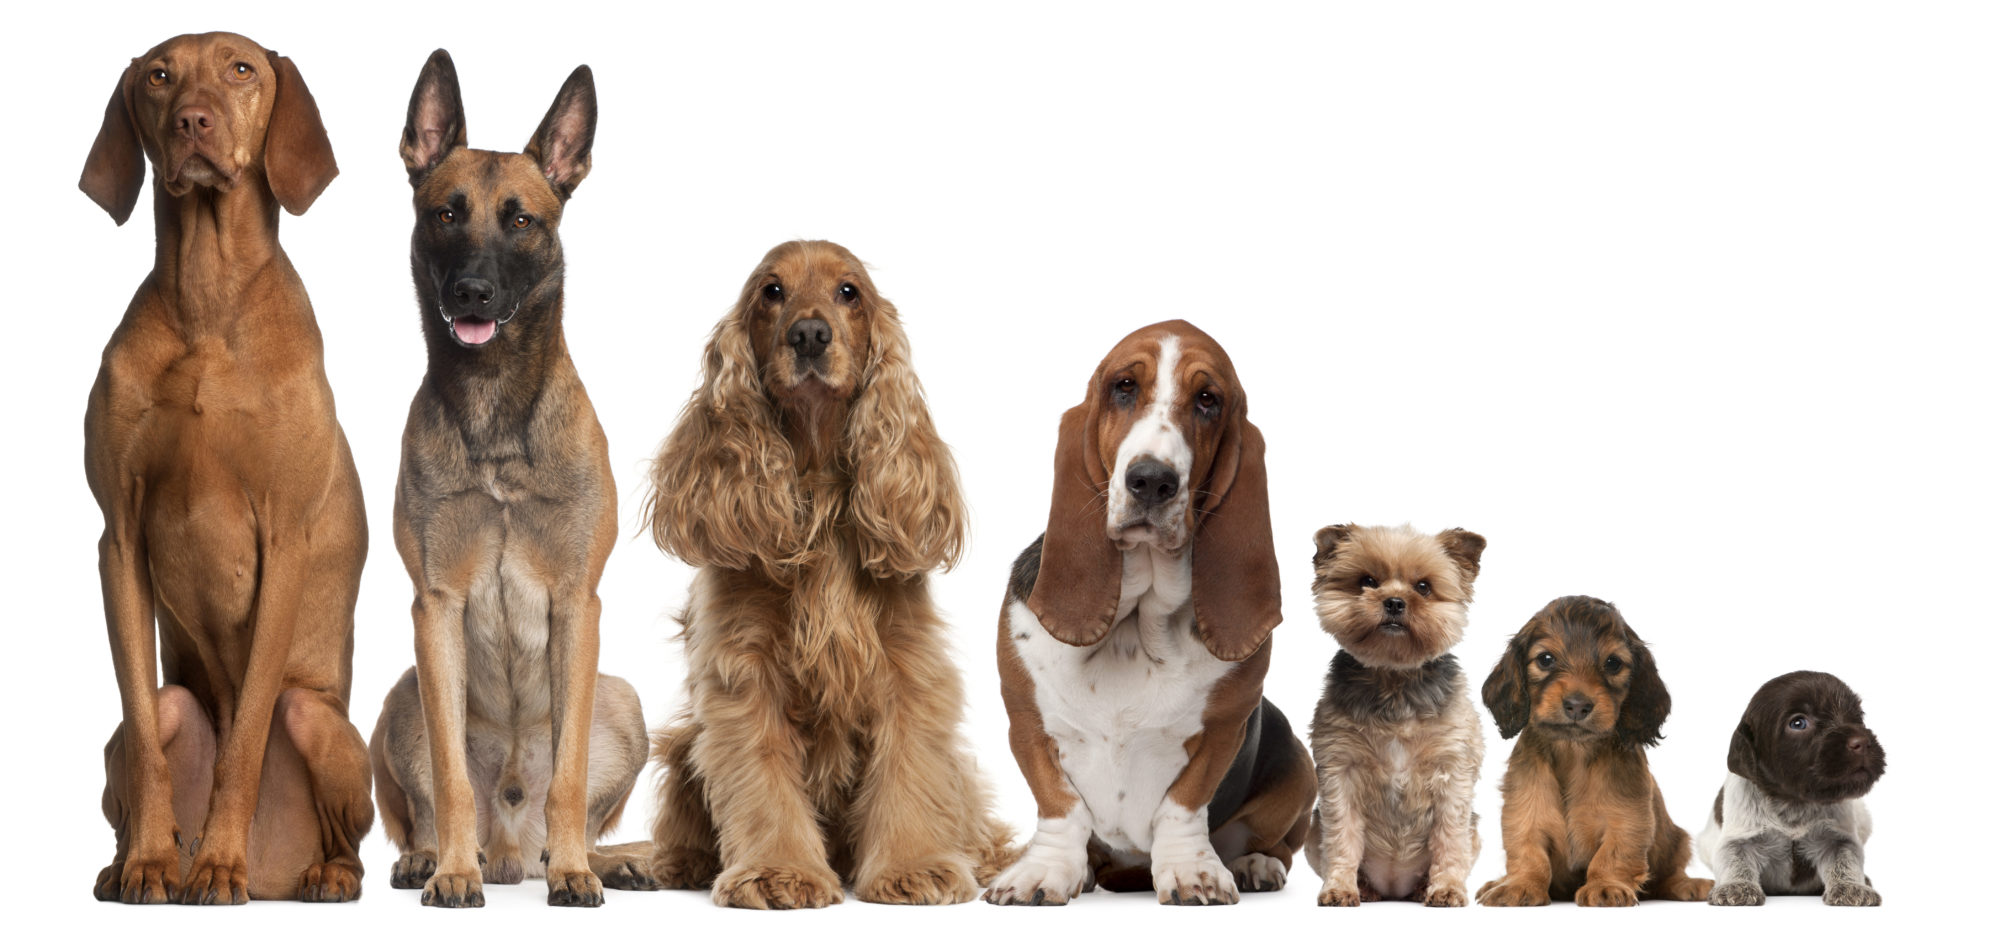 Before You Fall in Love: Finding the right dog to fit your family. Part 1.